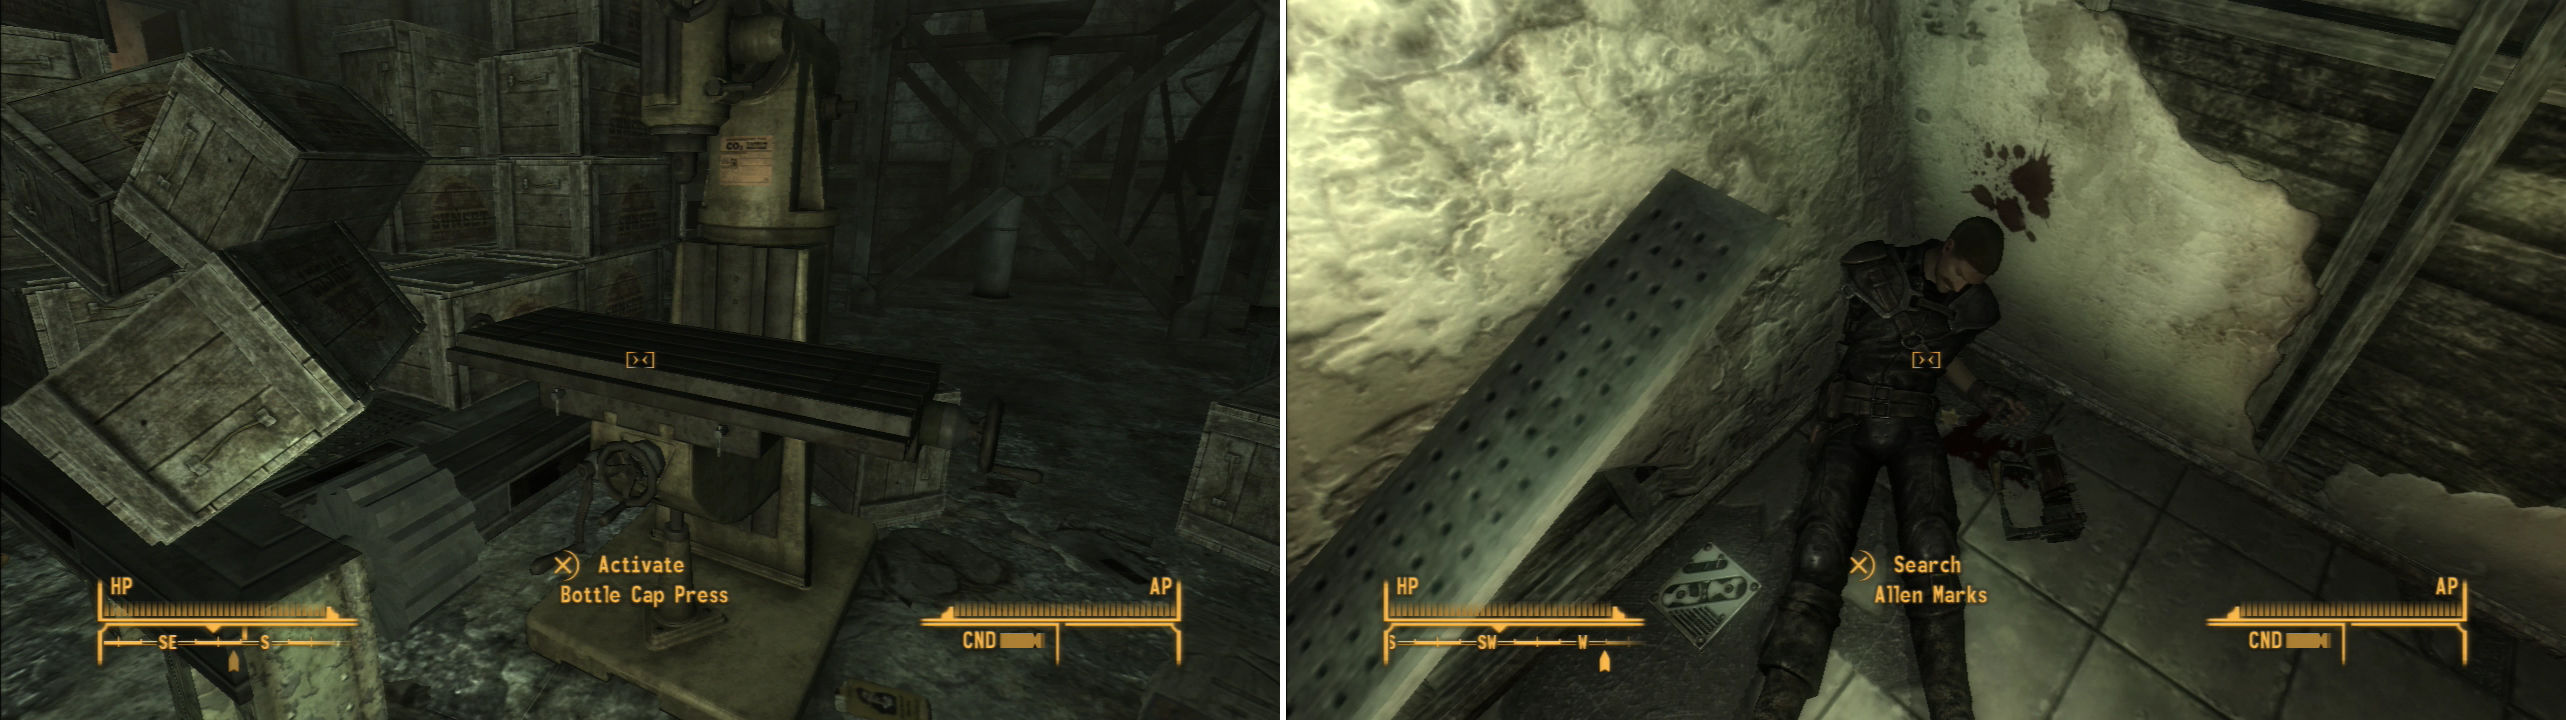 In the shipping area you’ll find the bottle cap press that Alice wants out of comission (left). Allen Marks may have perished in his homocidal quest to obtain Sunset Sarsaparilla Star Bottle Caps, but his loss is your gain (right).